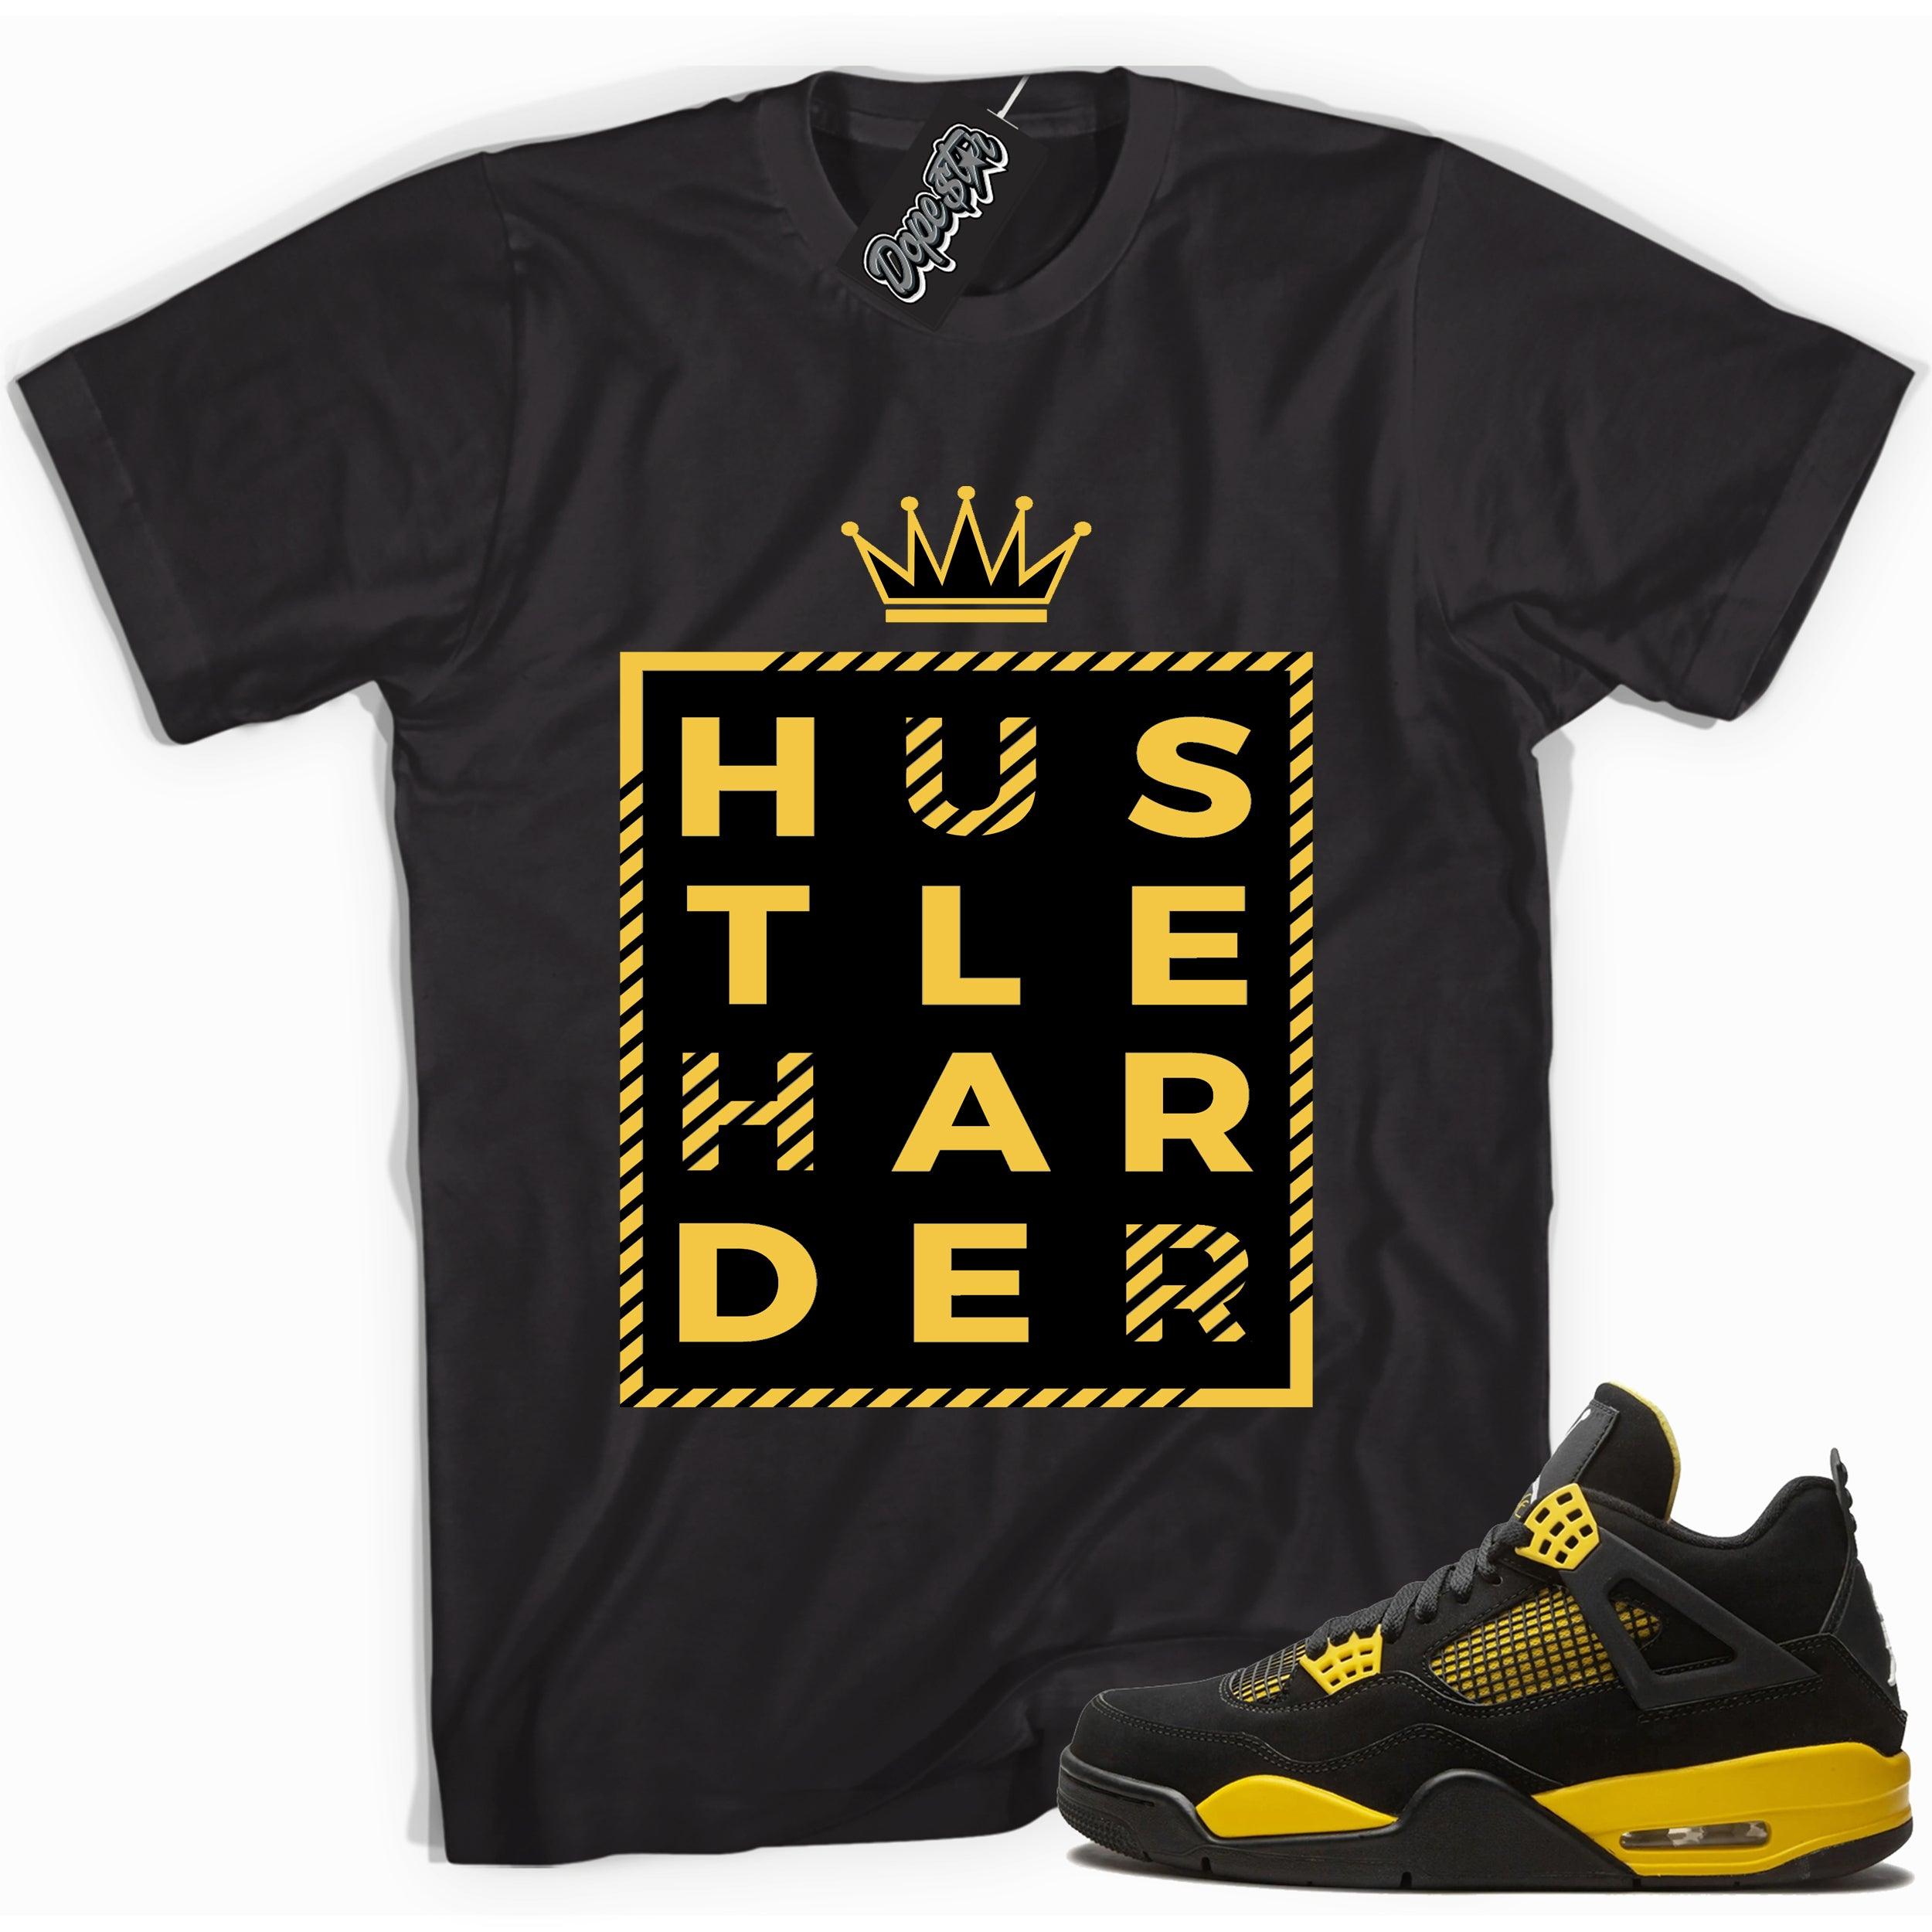 Cool black graphic tee with 'hustle harder' print, that perfectly matches  Air Jordan 4 Thunder sneakers